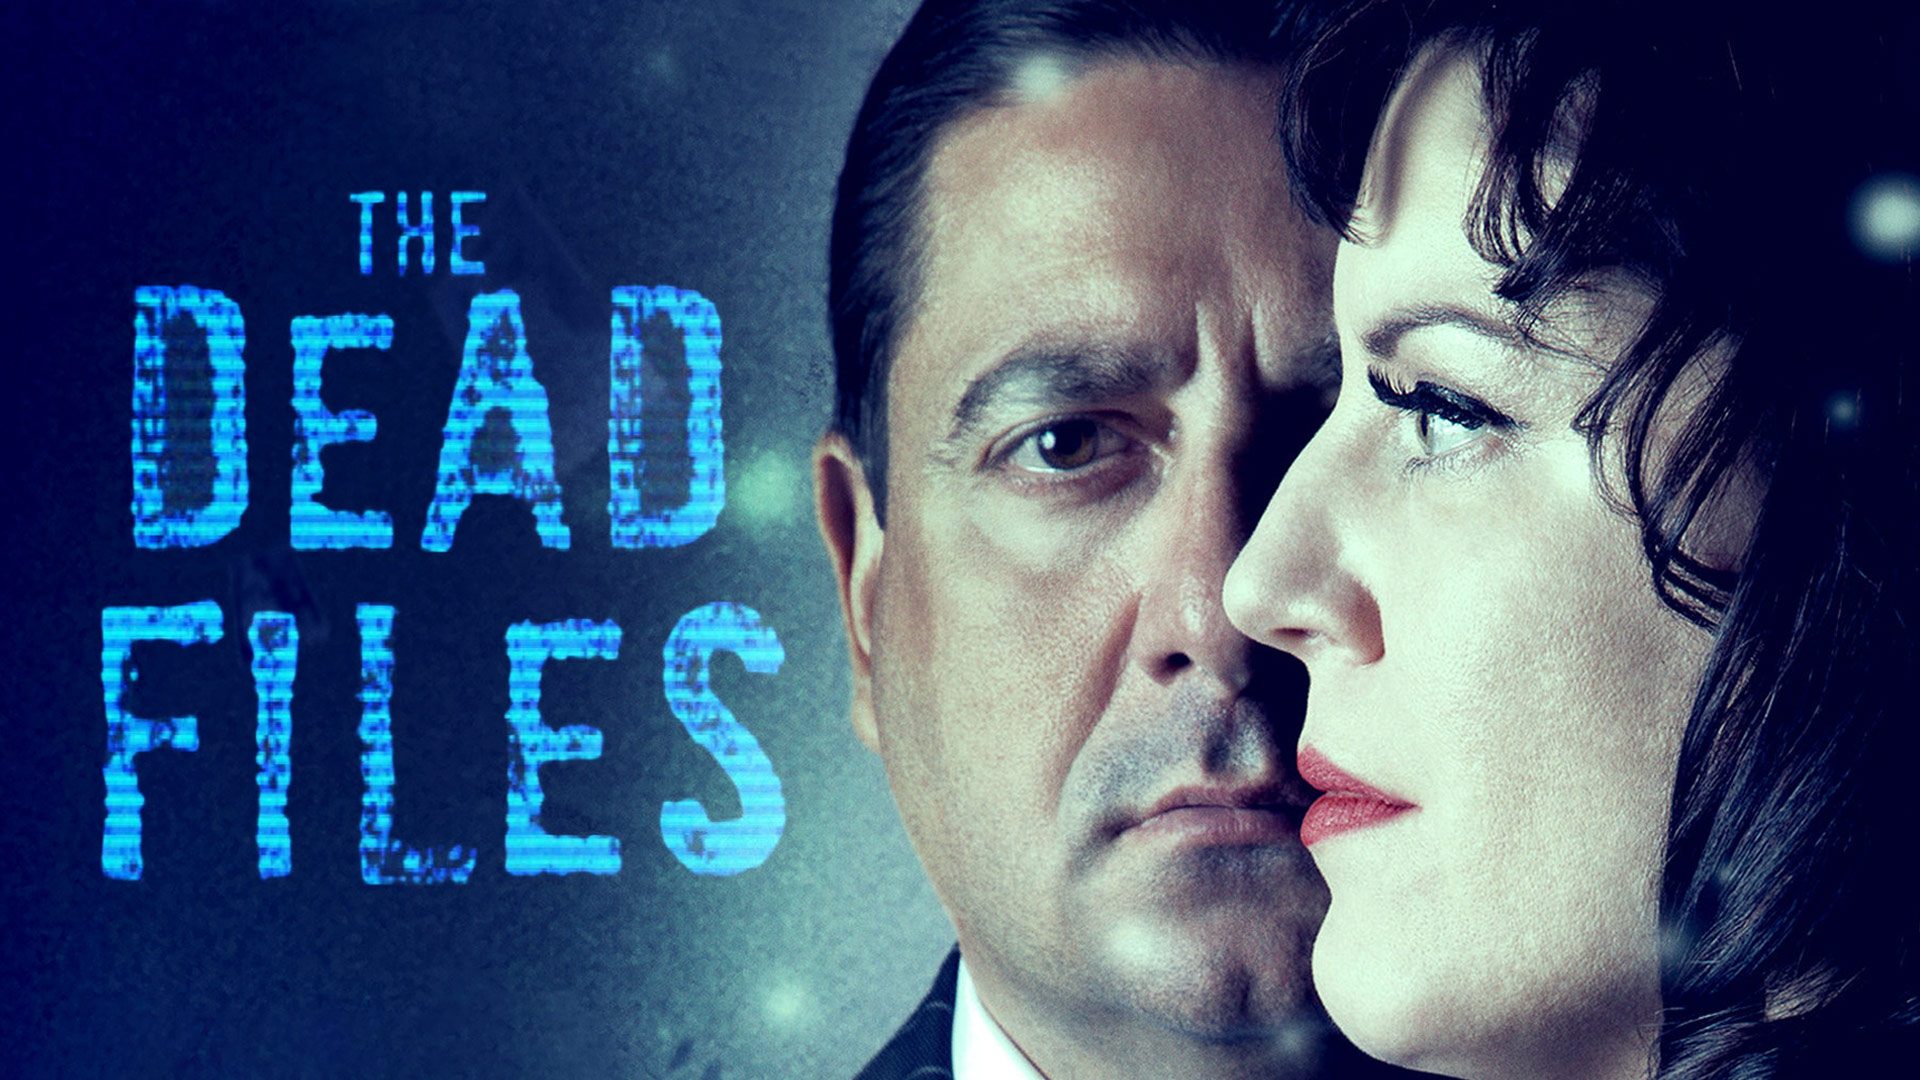 The Dead Files Wallpapers